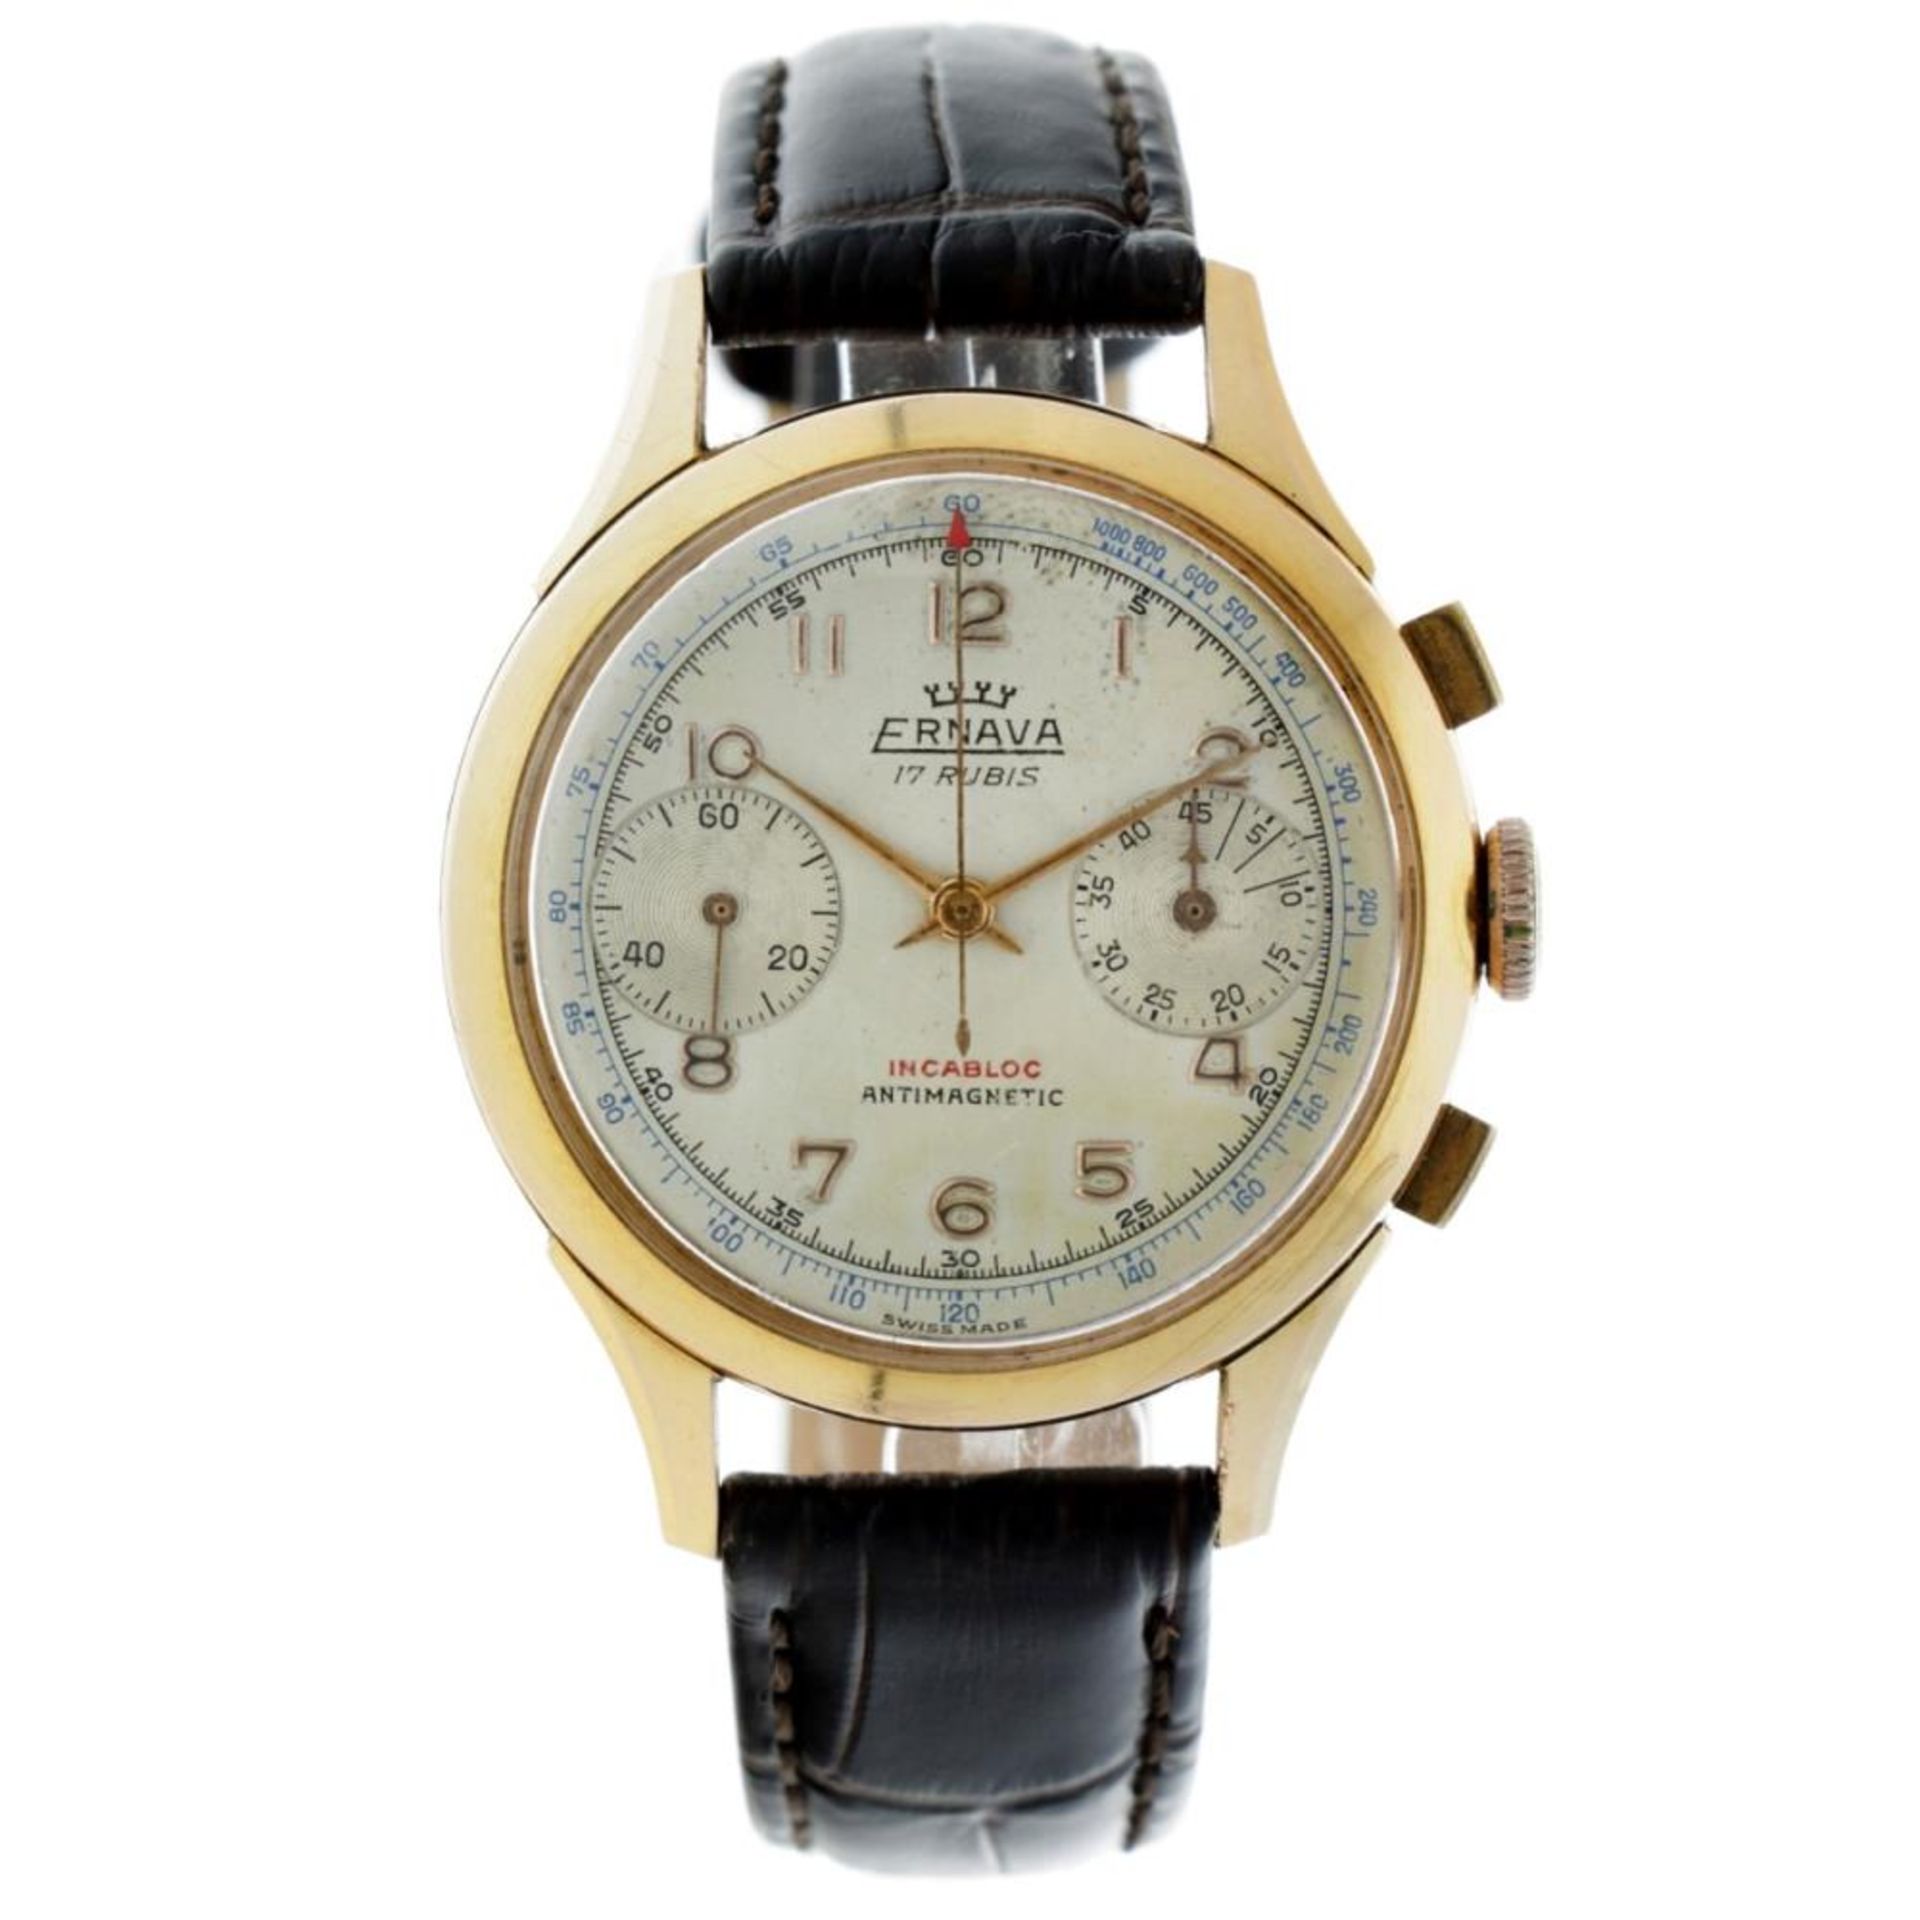 Ervana Chronograph 22083 - Men's watch - approx. 1950. - Image 2 of 12